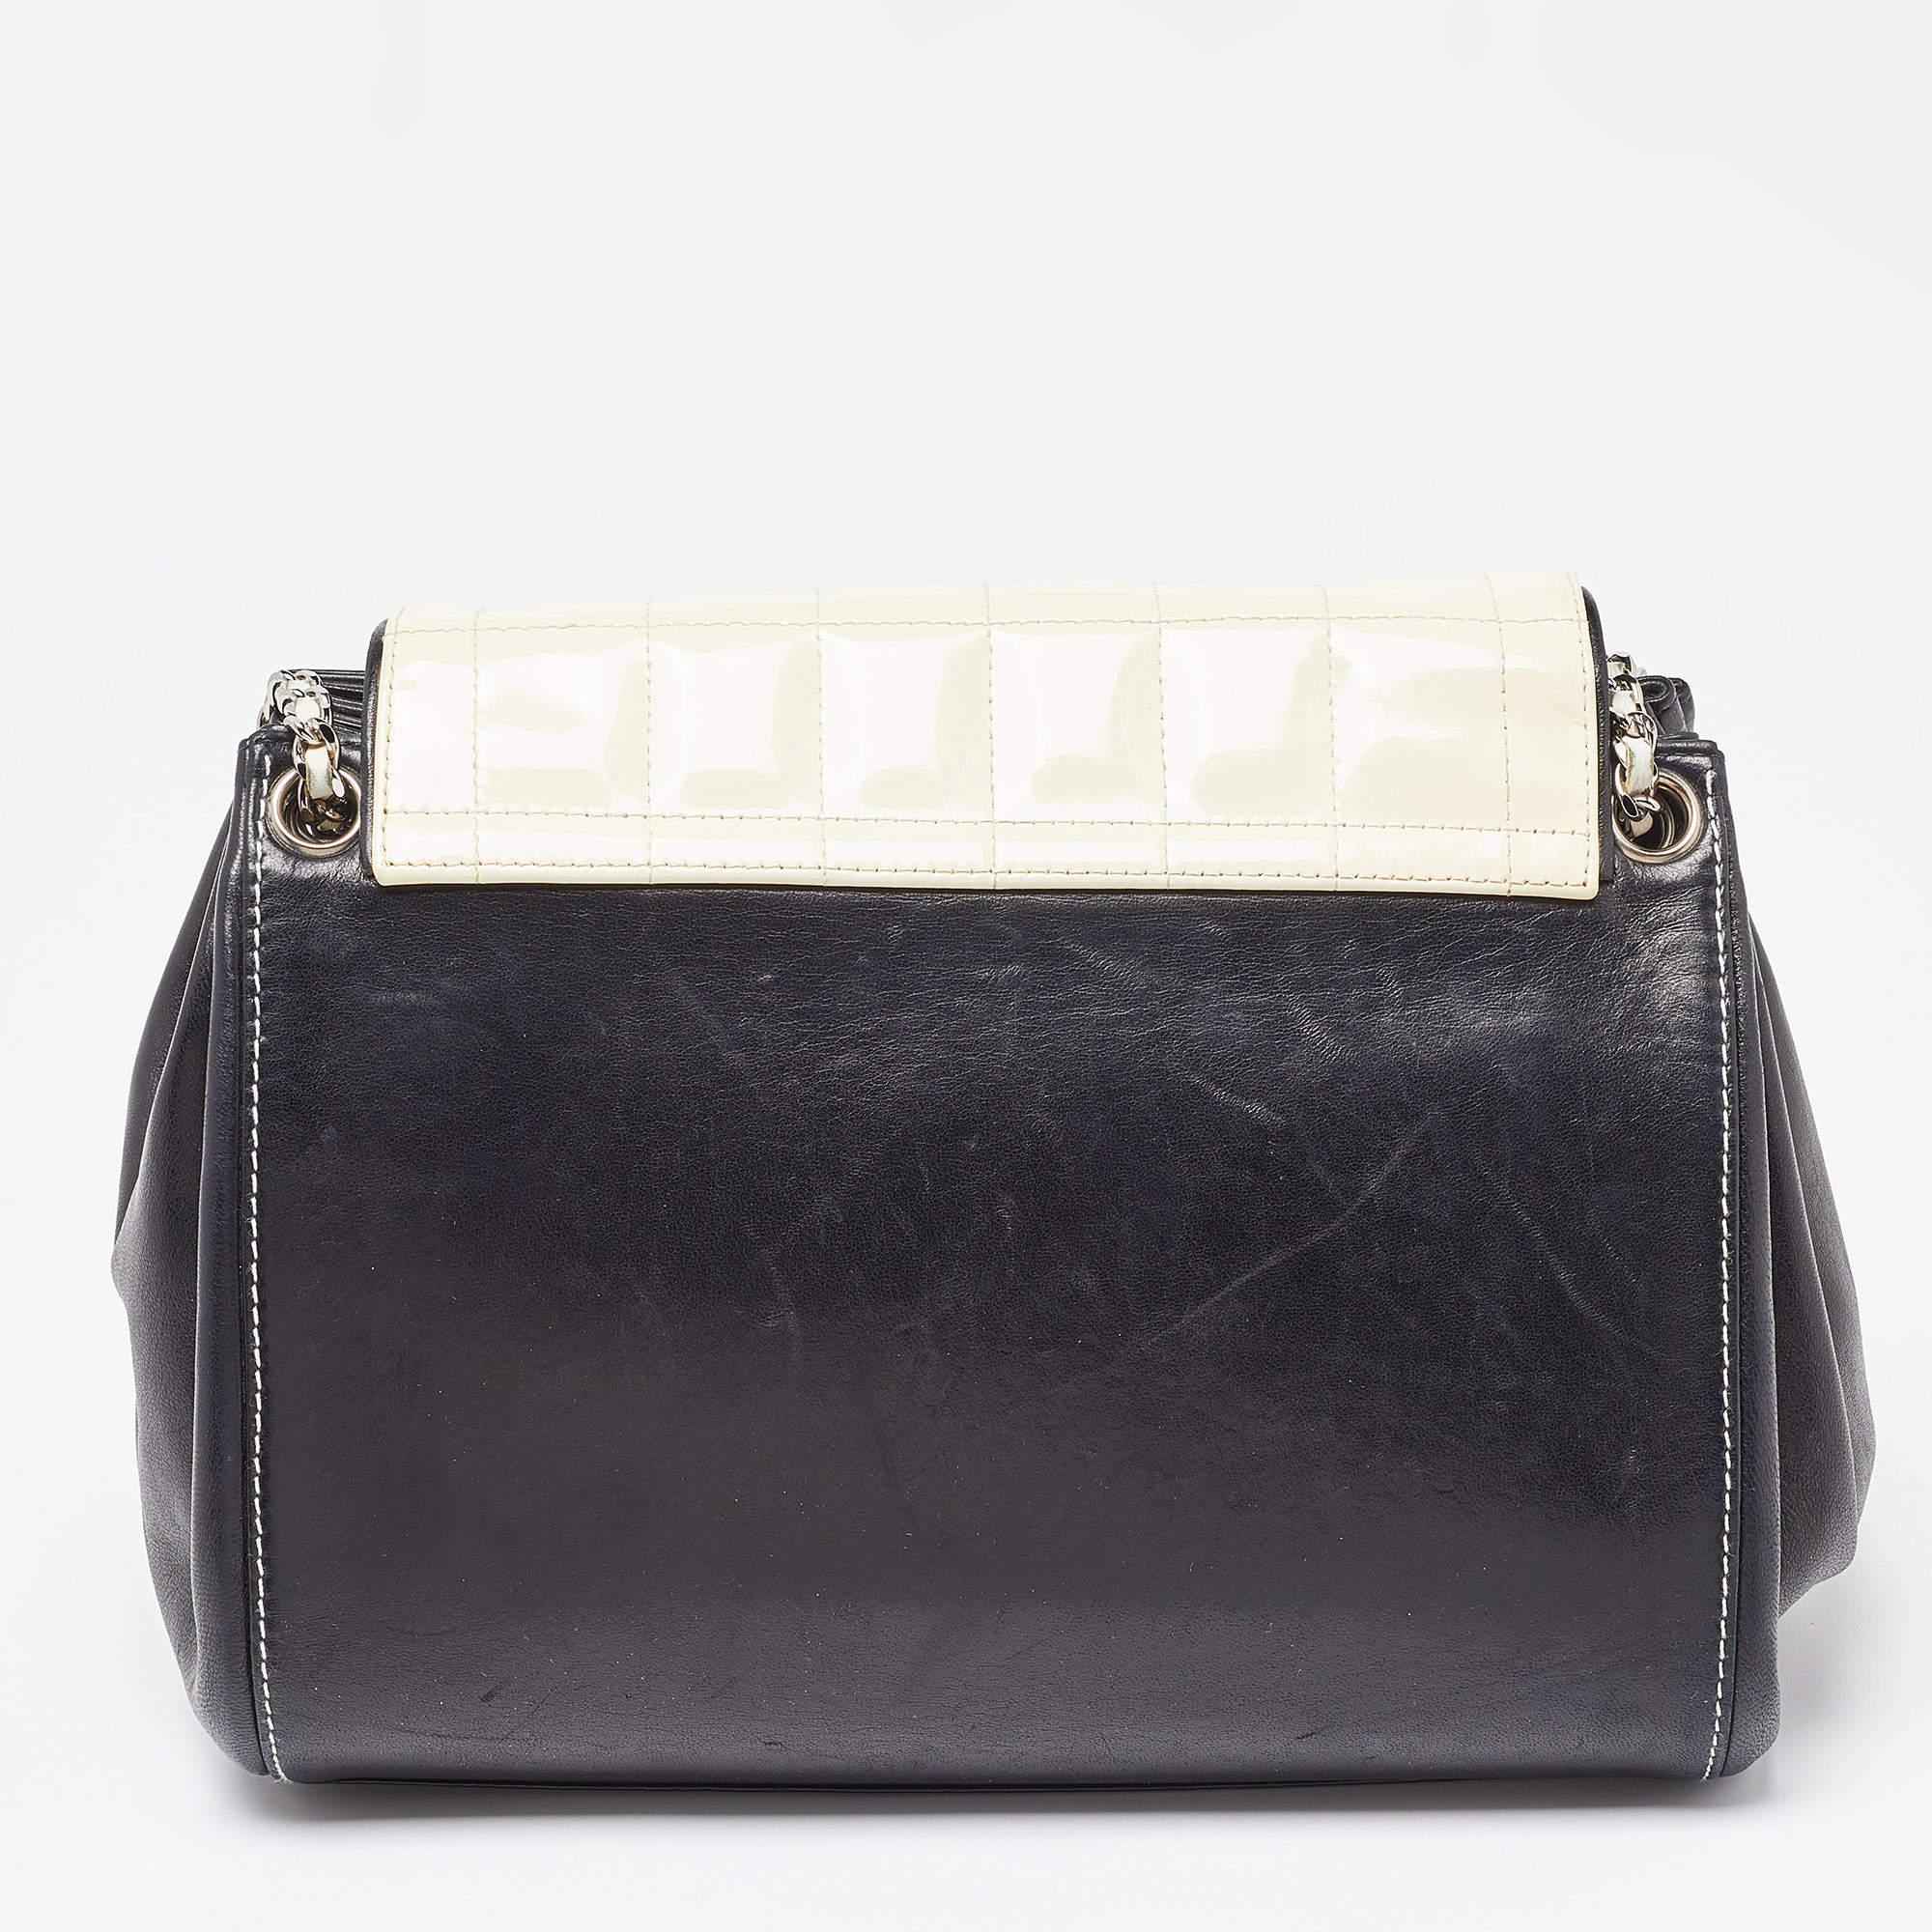 Chanel Black/White Square Quilted Patent Leather Accordion Flap Bag In Good Condition In Dubai, Al Qouz 2